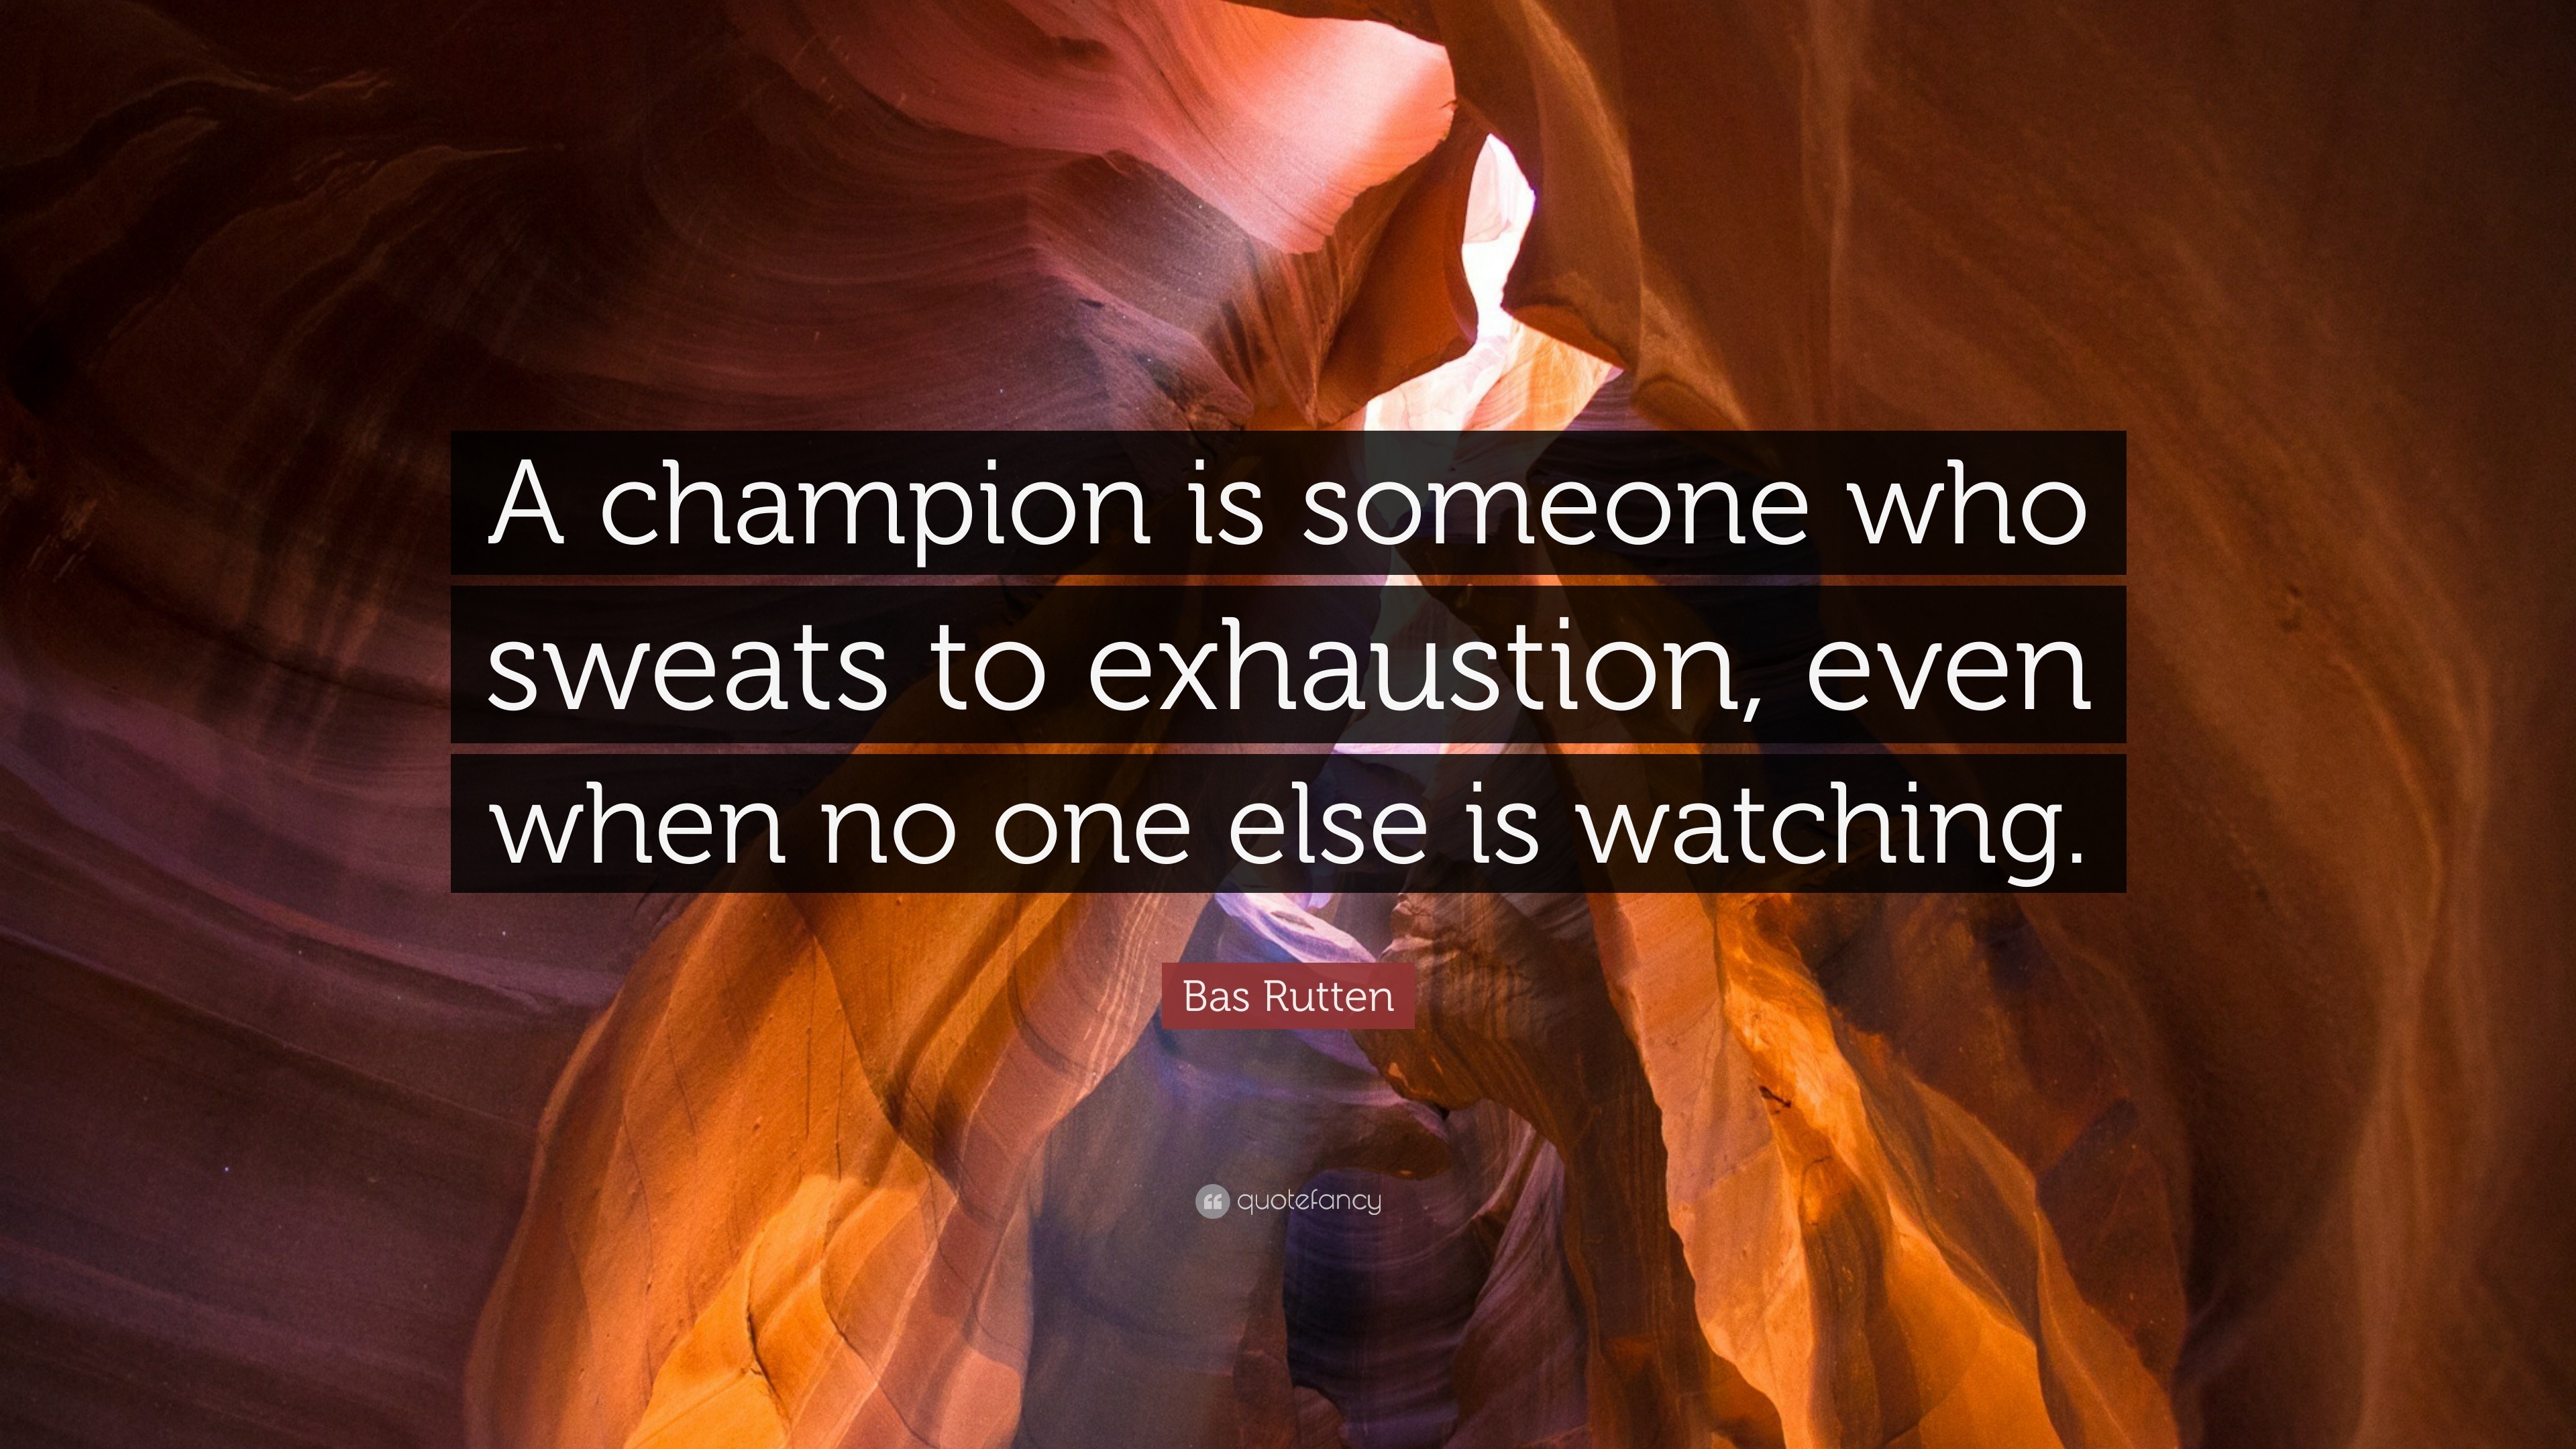 ligegyldighed burst Stewart ø Bas Rutten Quote: “A champion is someone who sweats to exhaustion, even  when no one else